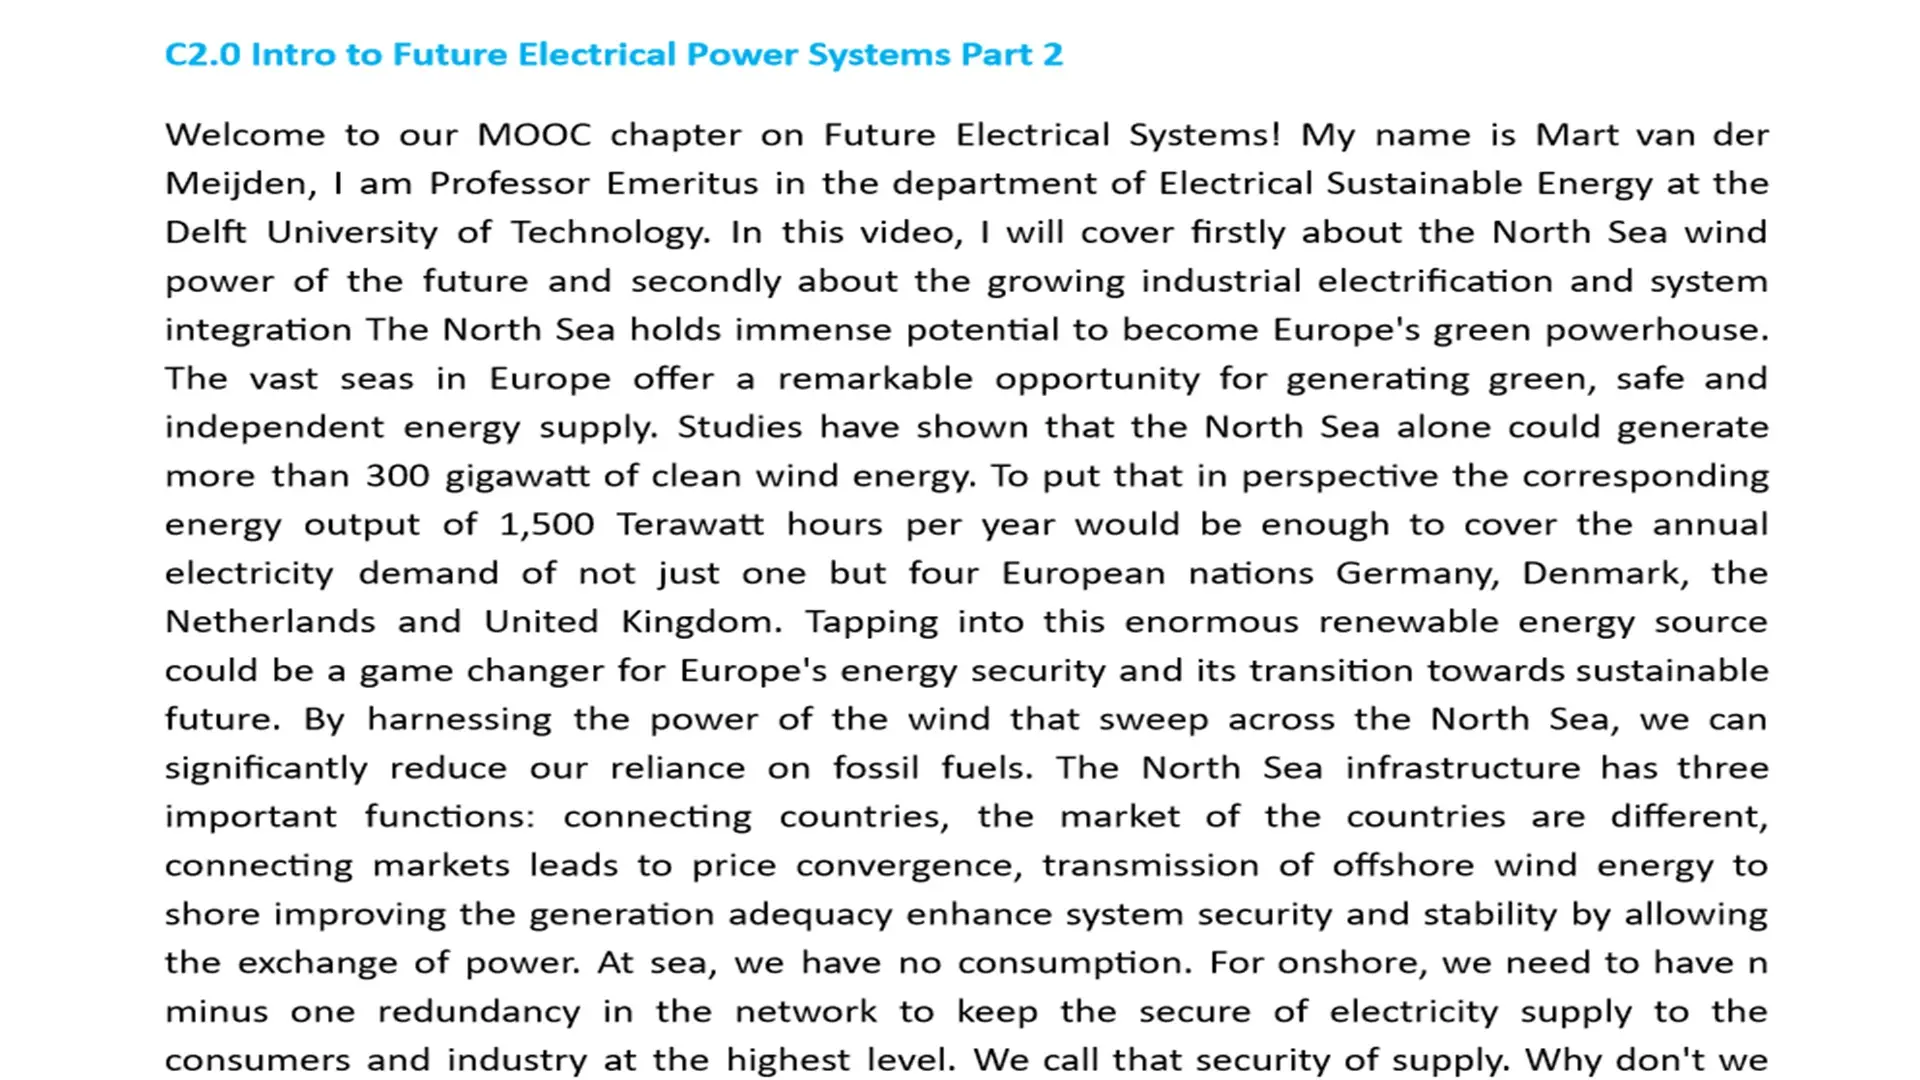 C2: Electrical Power Systems of the Future Part 2 Transcript